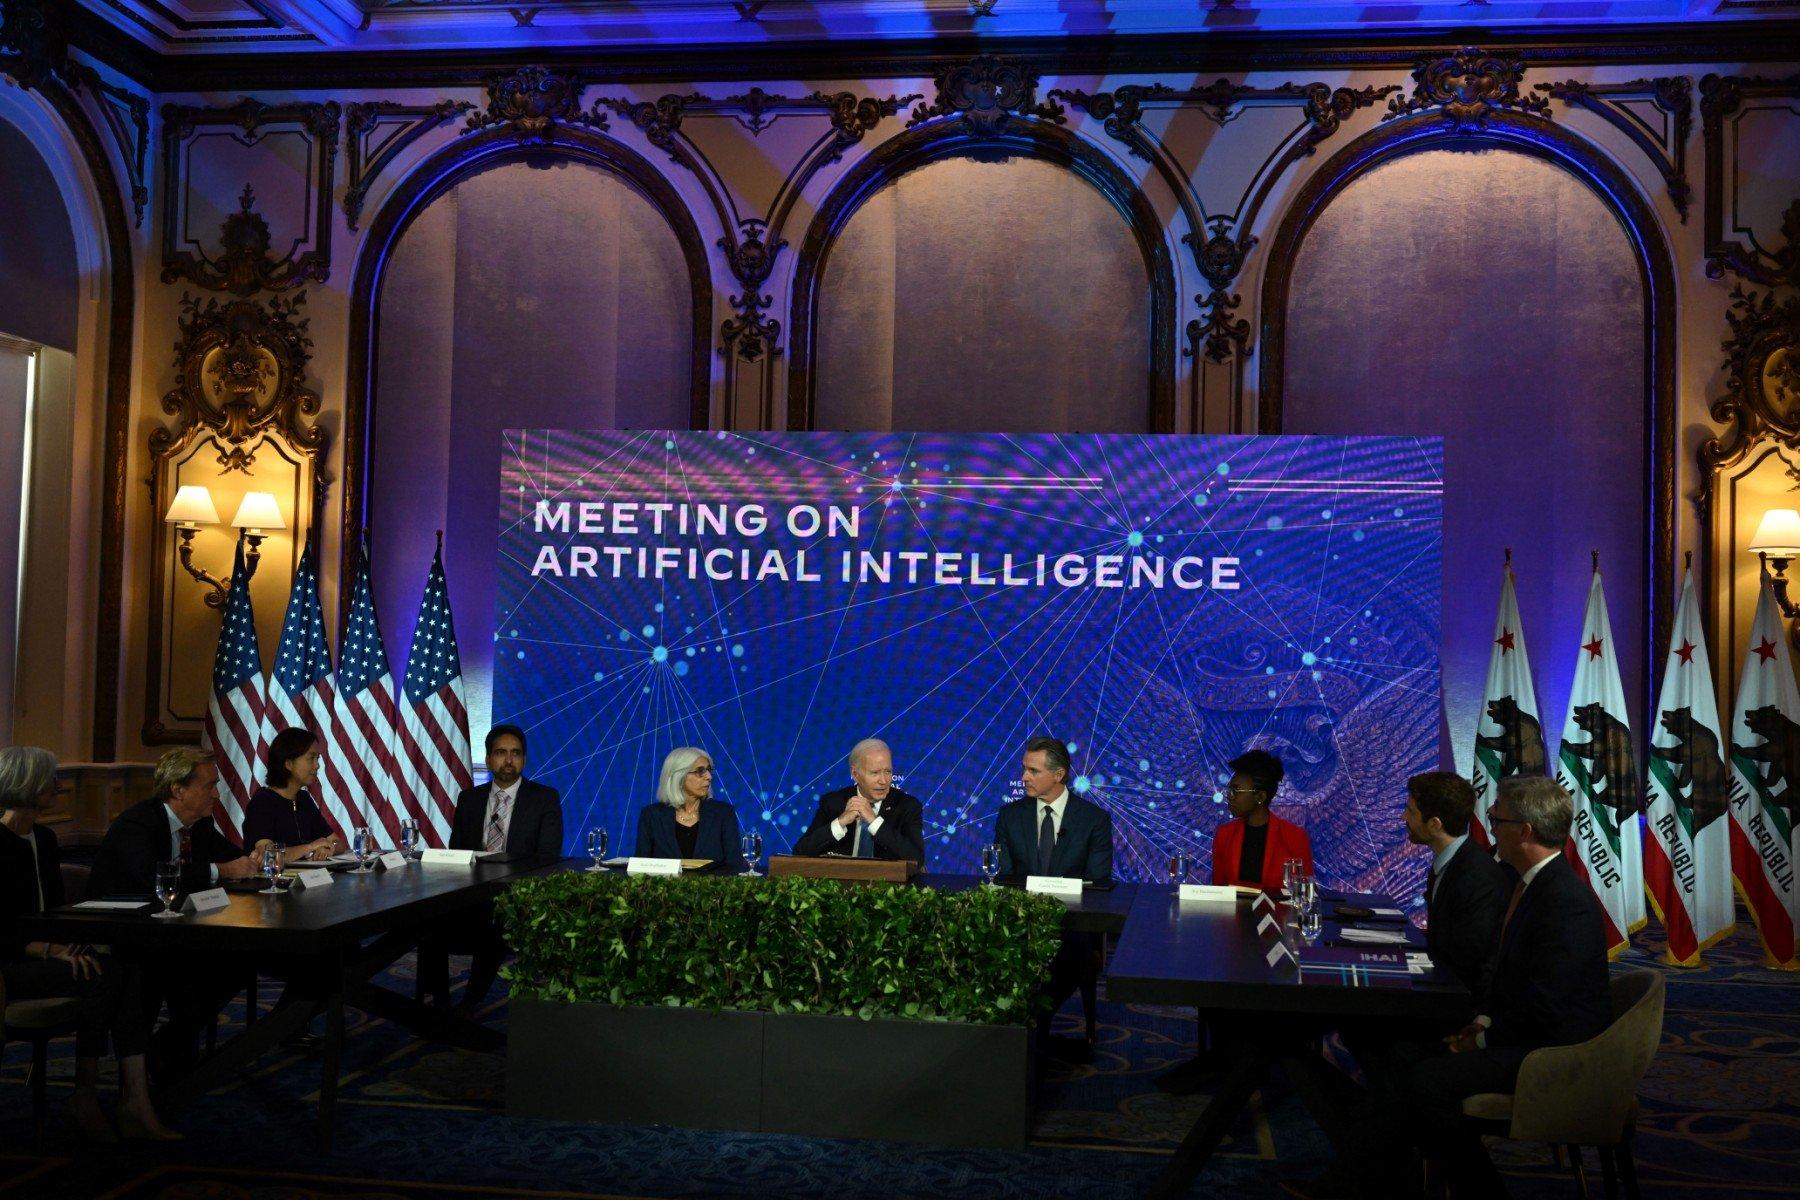 US President Joe Biden (C) takes part in an event discussing the opportunities and risks of Artificial Intelligence at the Fairmont Hotel in San Francisco, California, on June 20, 2023. (Photo by ANDREW CABALLERO-REYNOLDS / AFP)